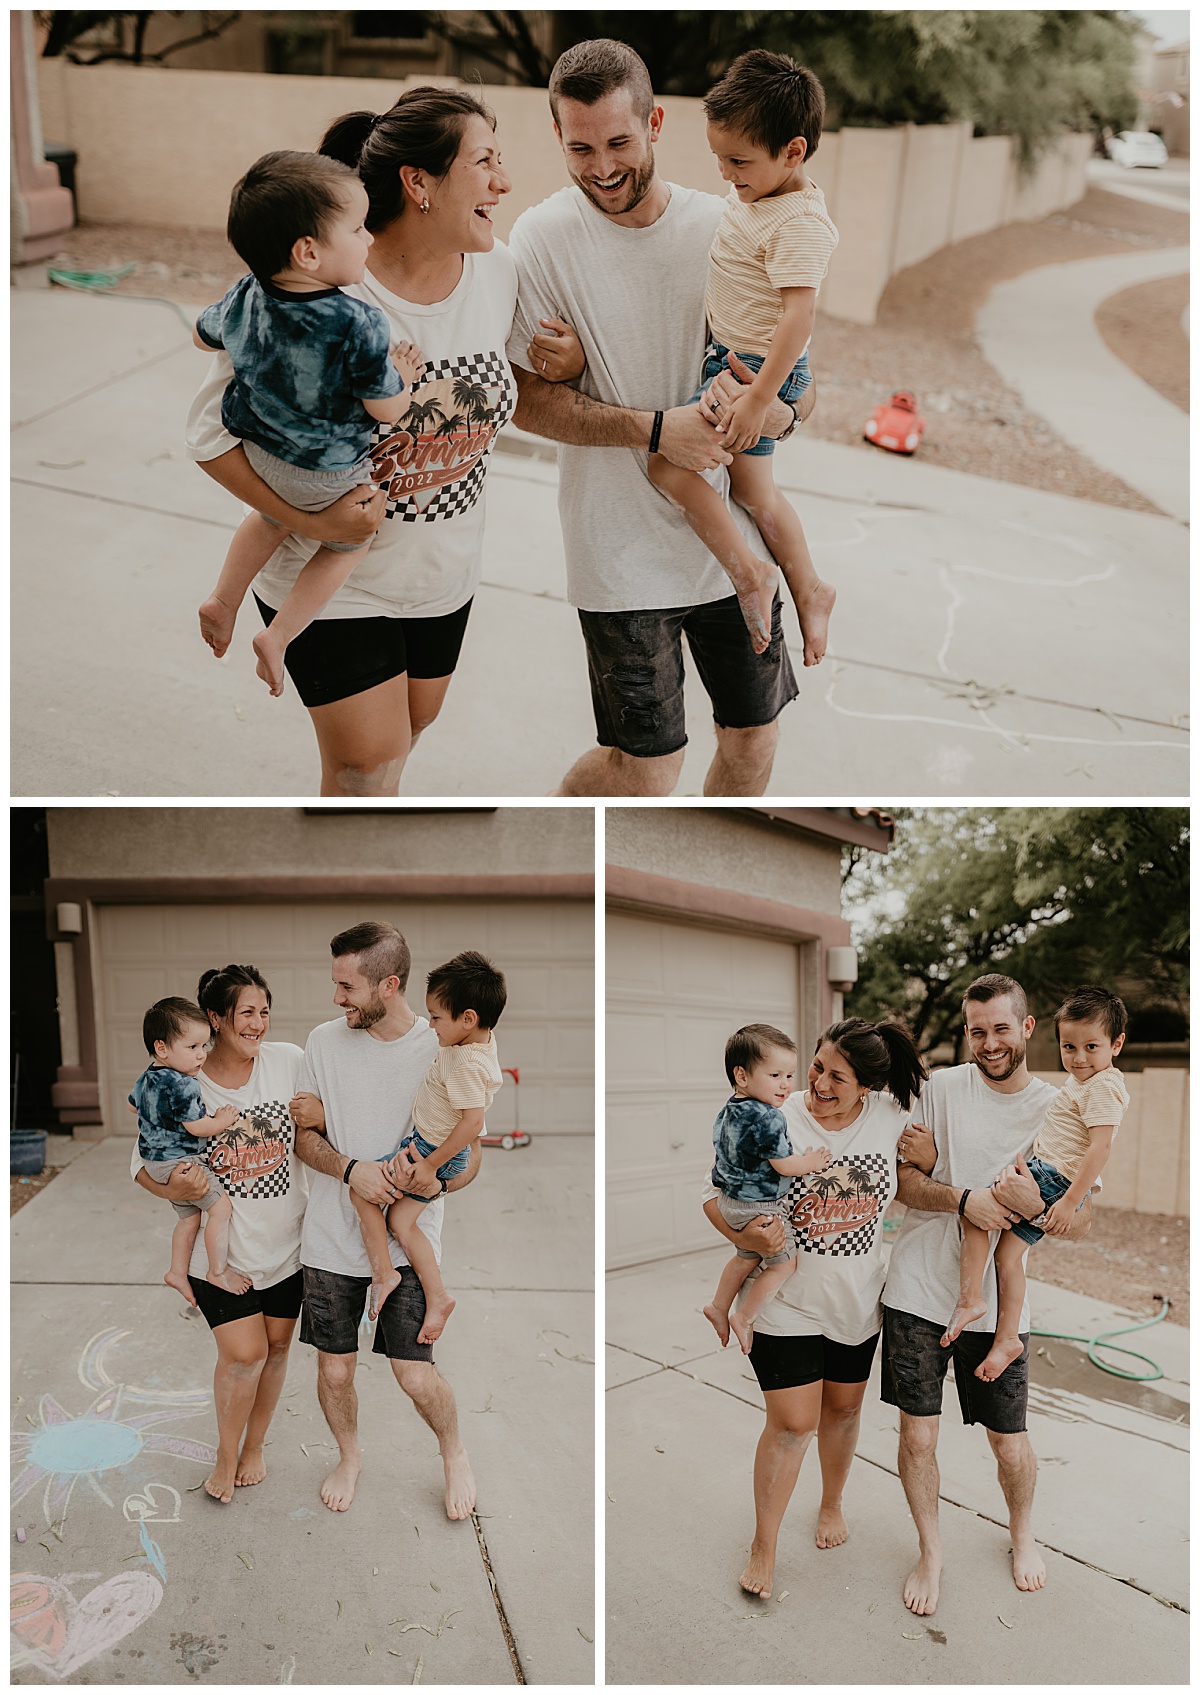 Family laughing in the driveway for summer family photos in Tucson, Arizona taken by Alexa Rae Photo, a Tucson Family Photographer.